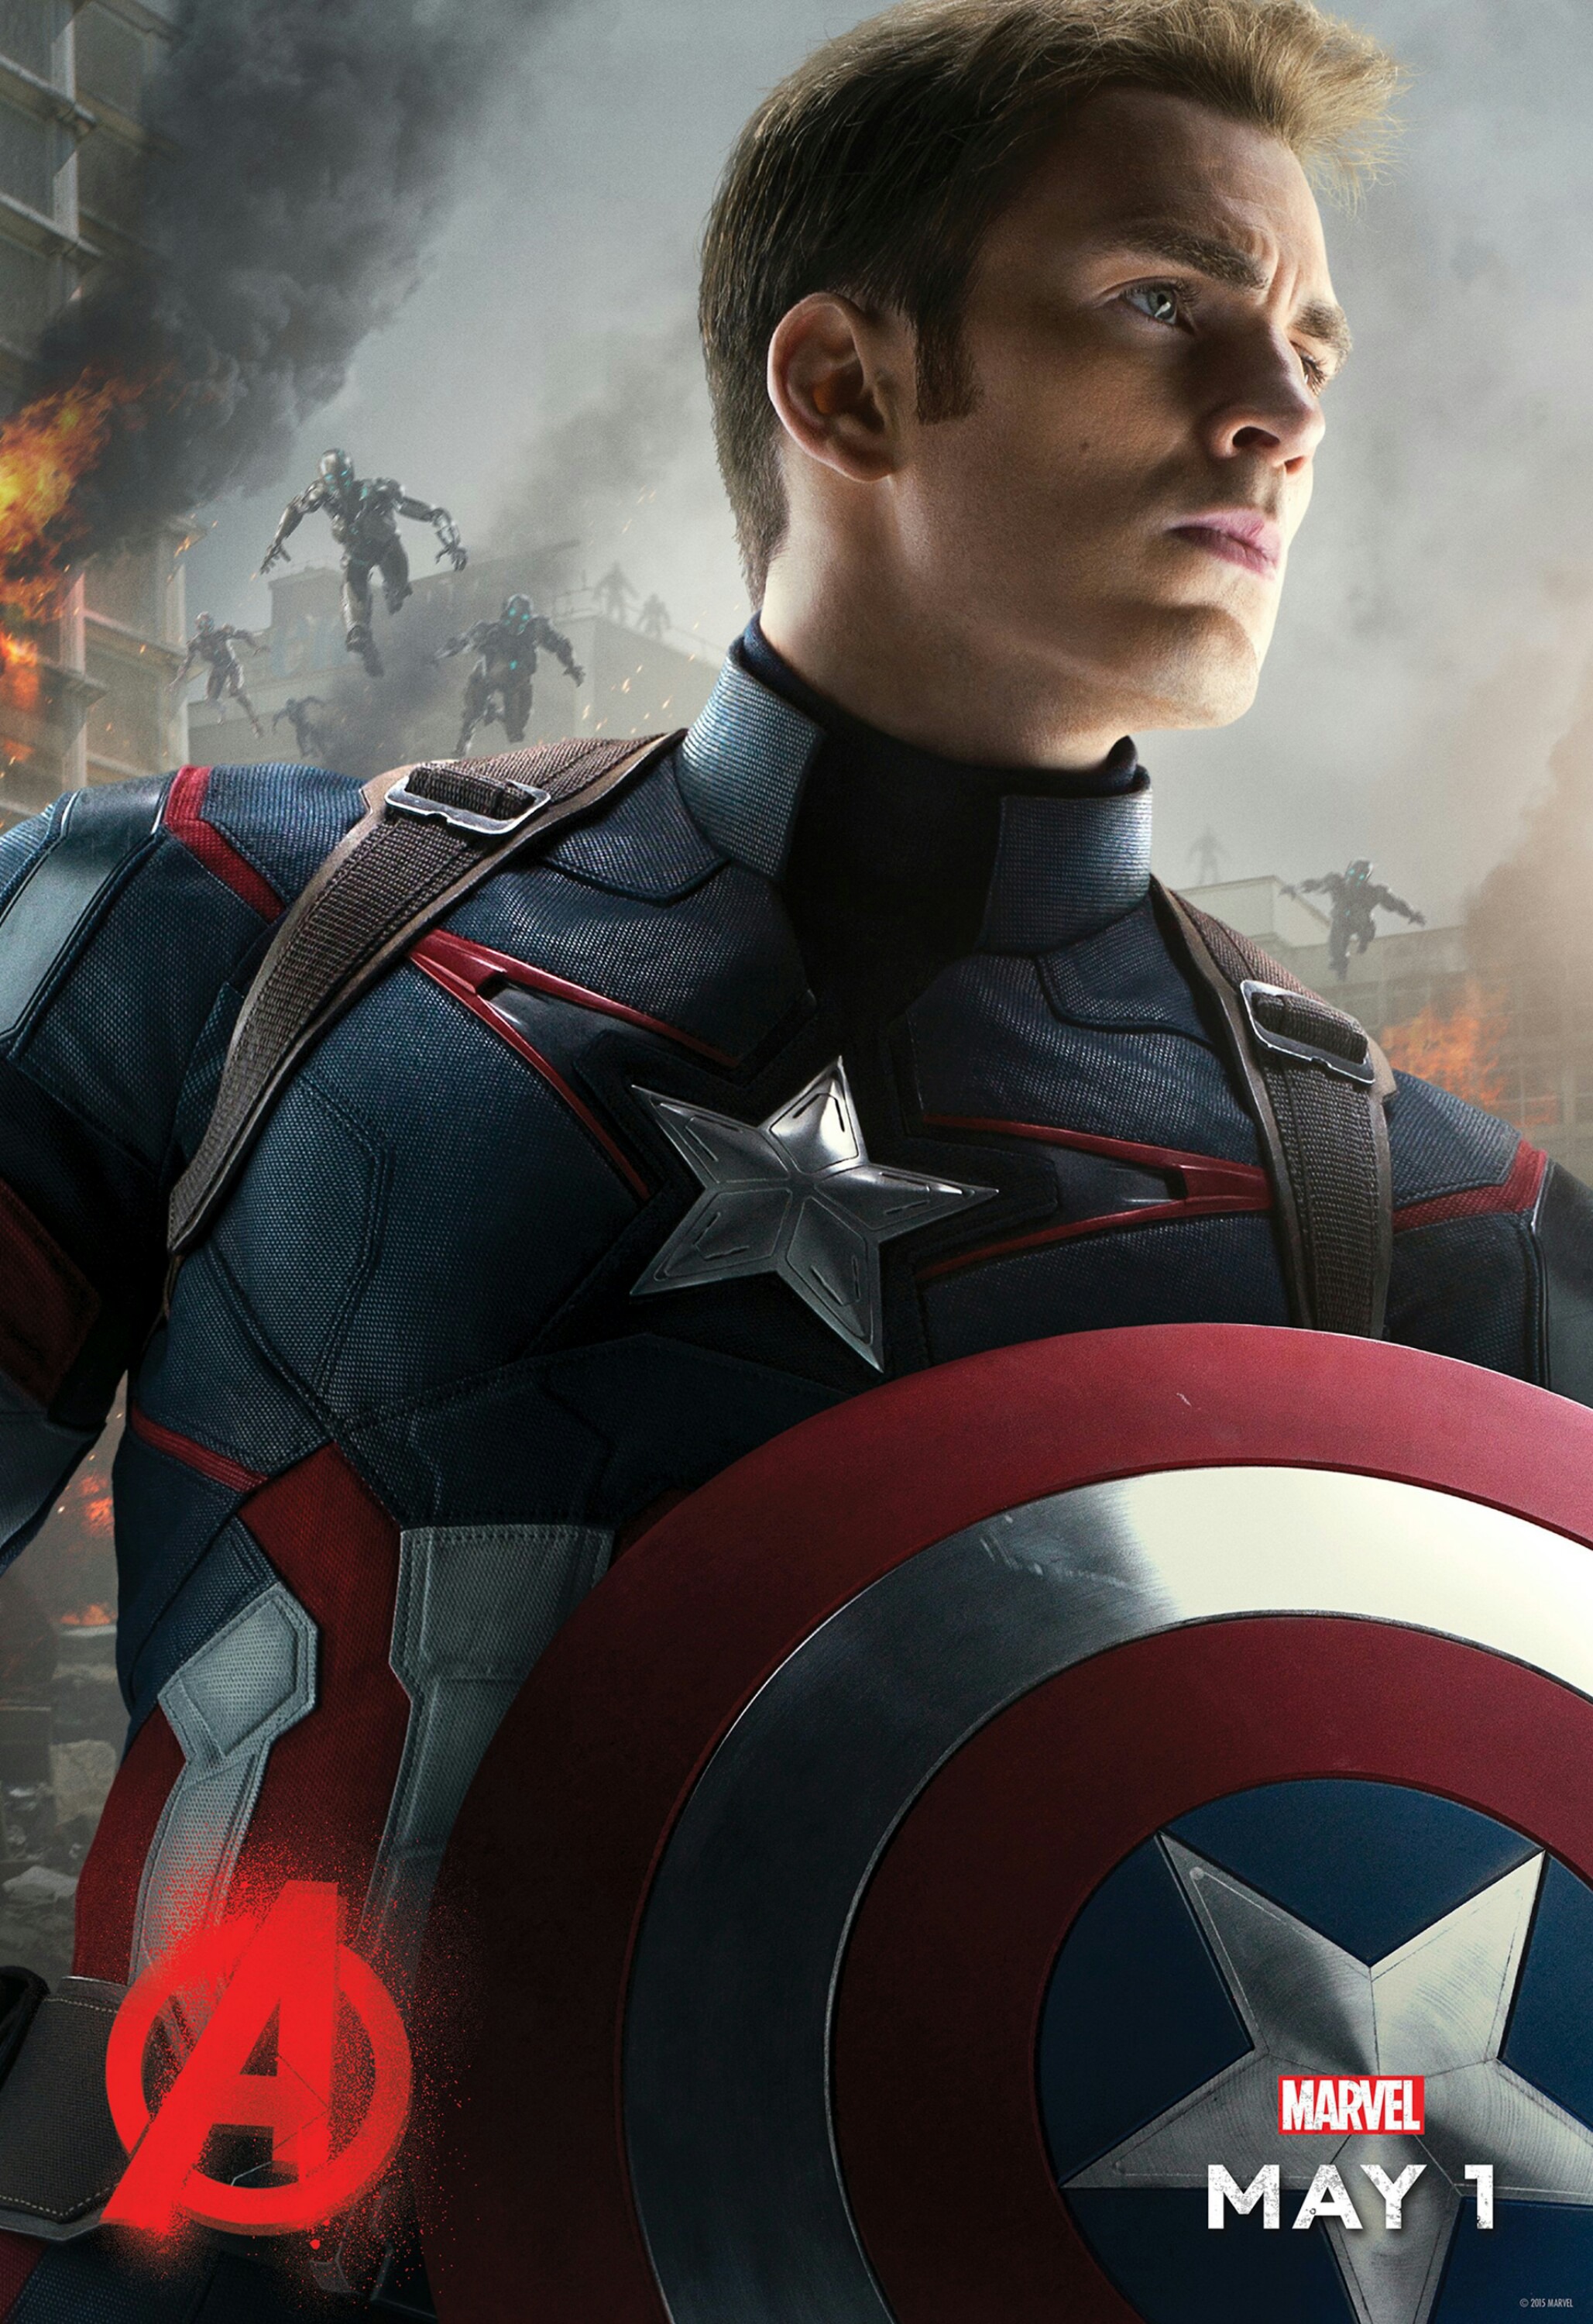 Mega Sized Movie Poster Image for Avengers: Age of Ultron (#19 of 36)